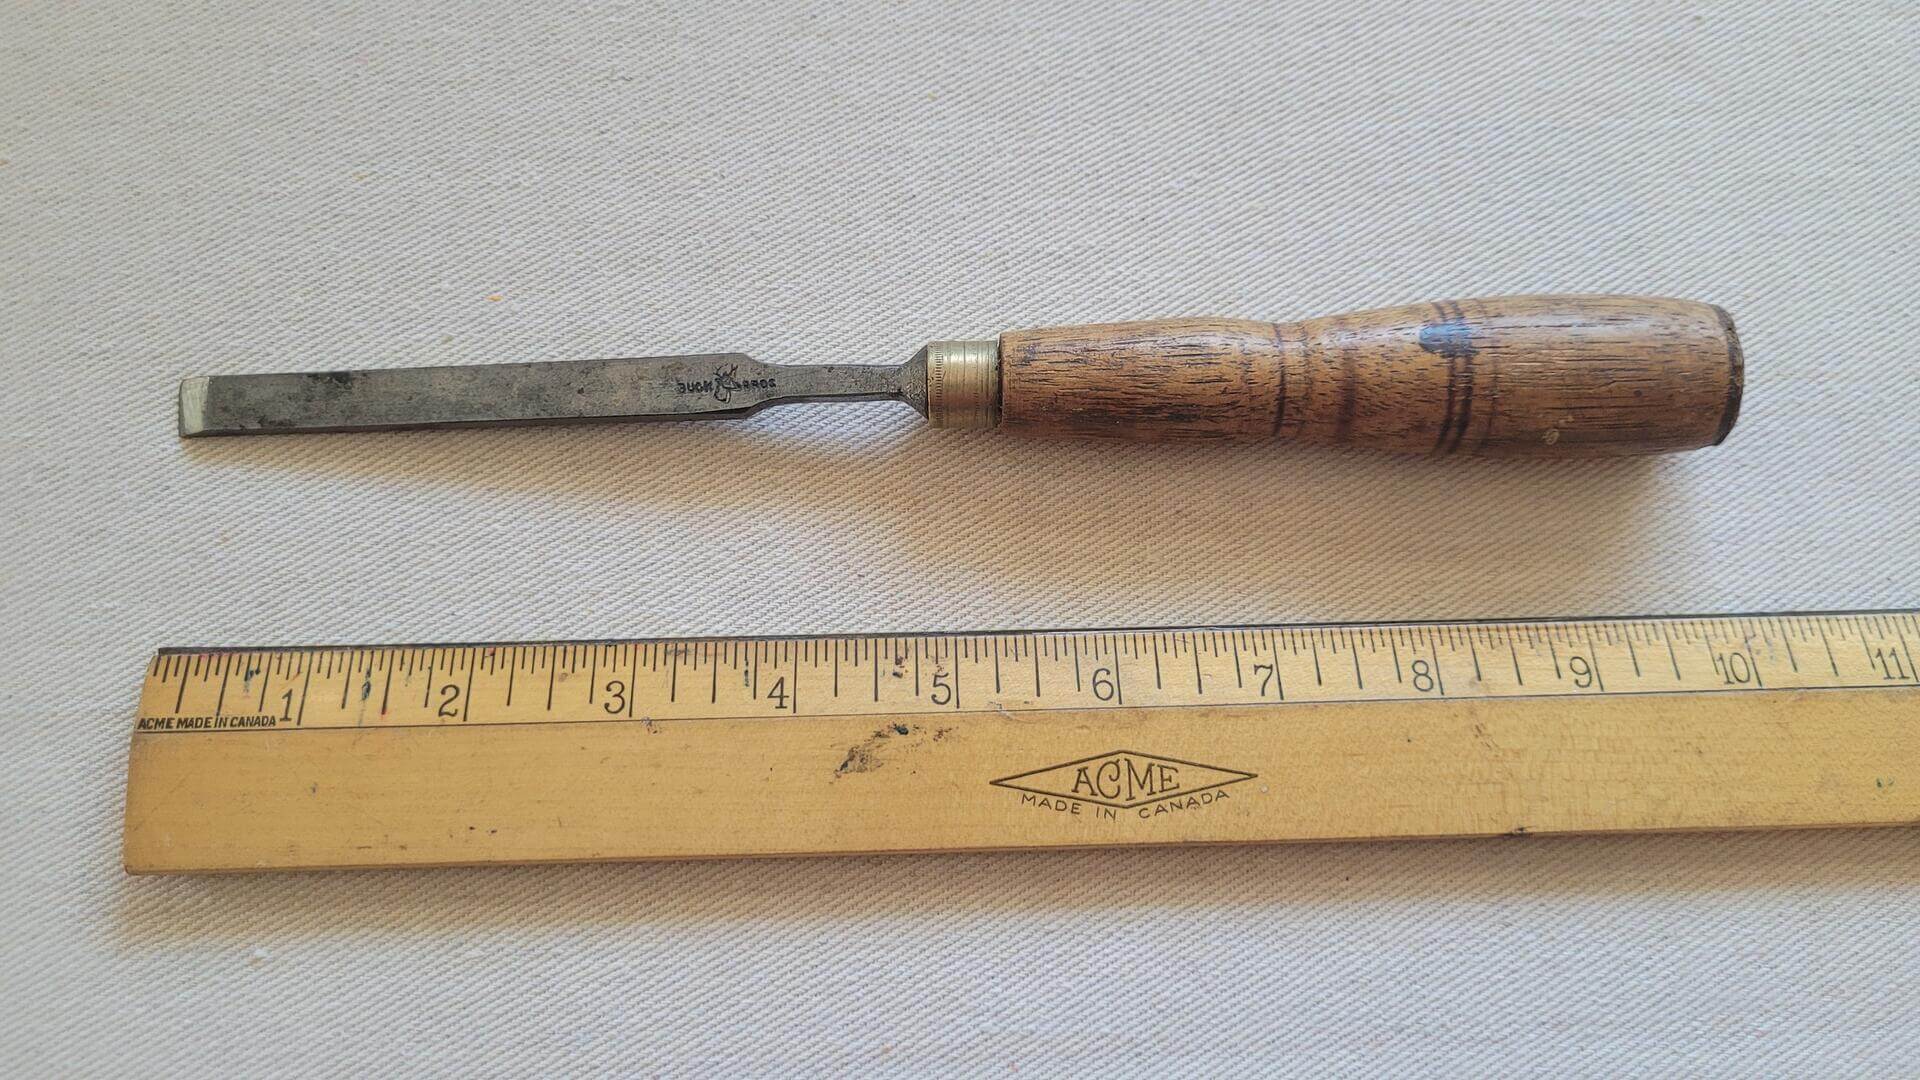 Antique Buck Bros 3/8" firmer tang cast steel chisel with brass ferrule and wooden handle. Vintage made in USA collectible woodworking and carpentry hand tools